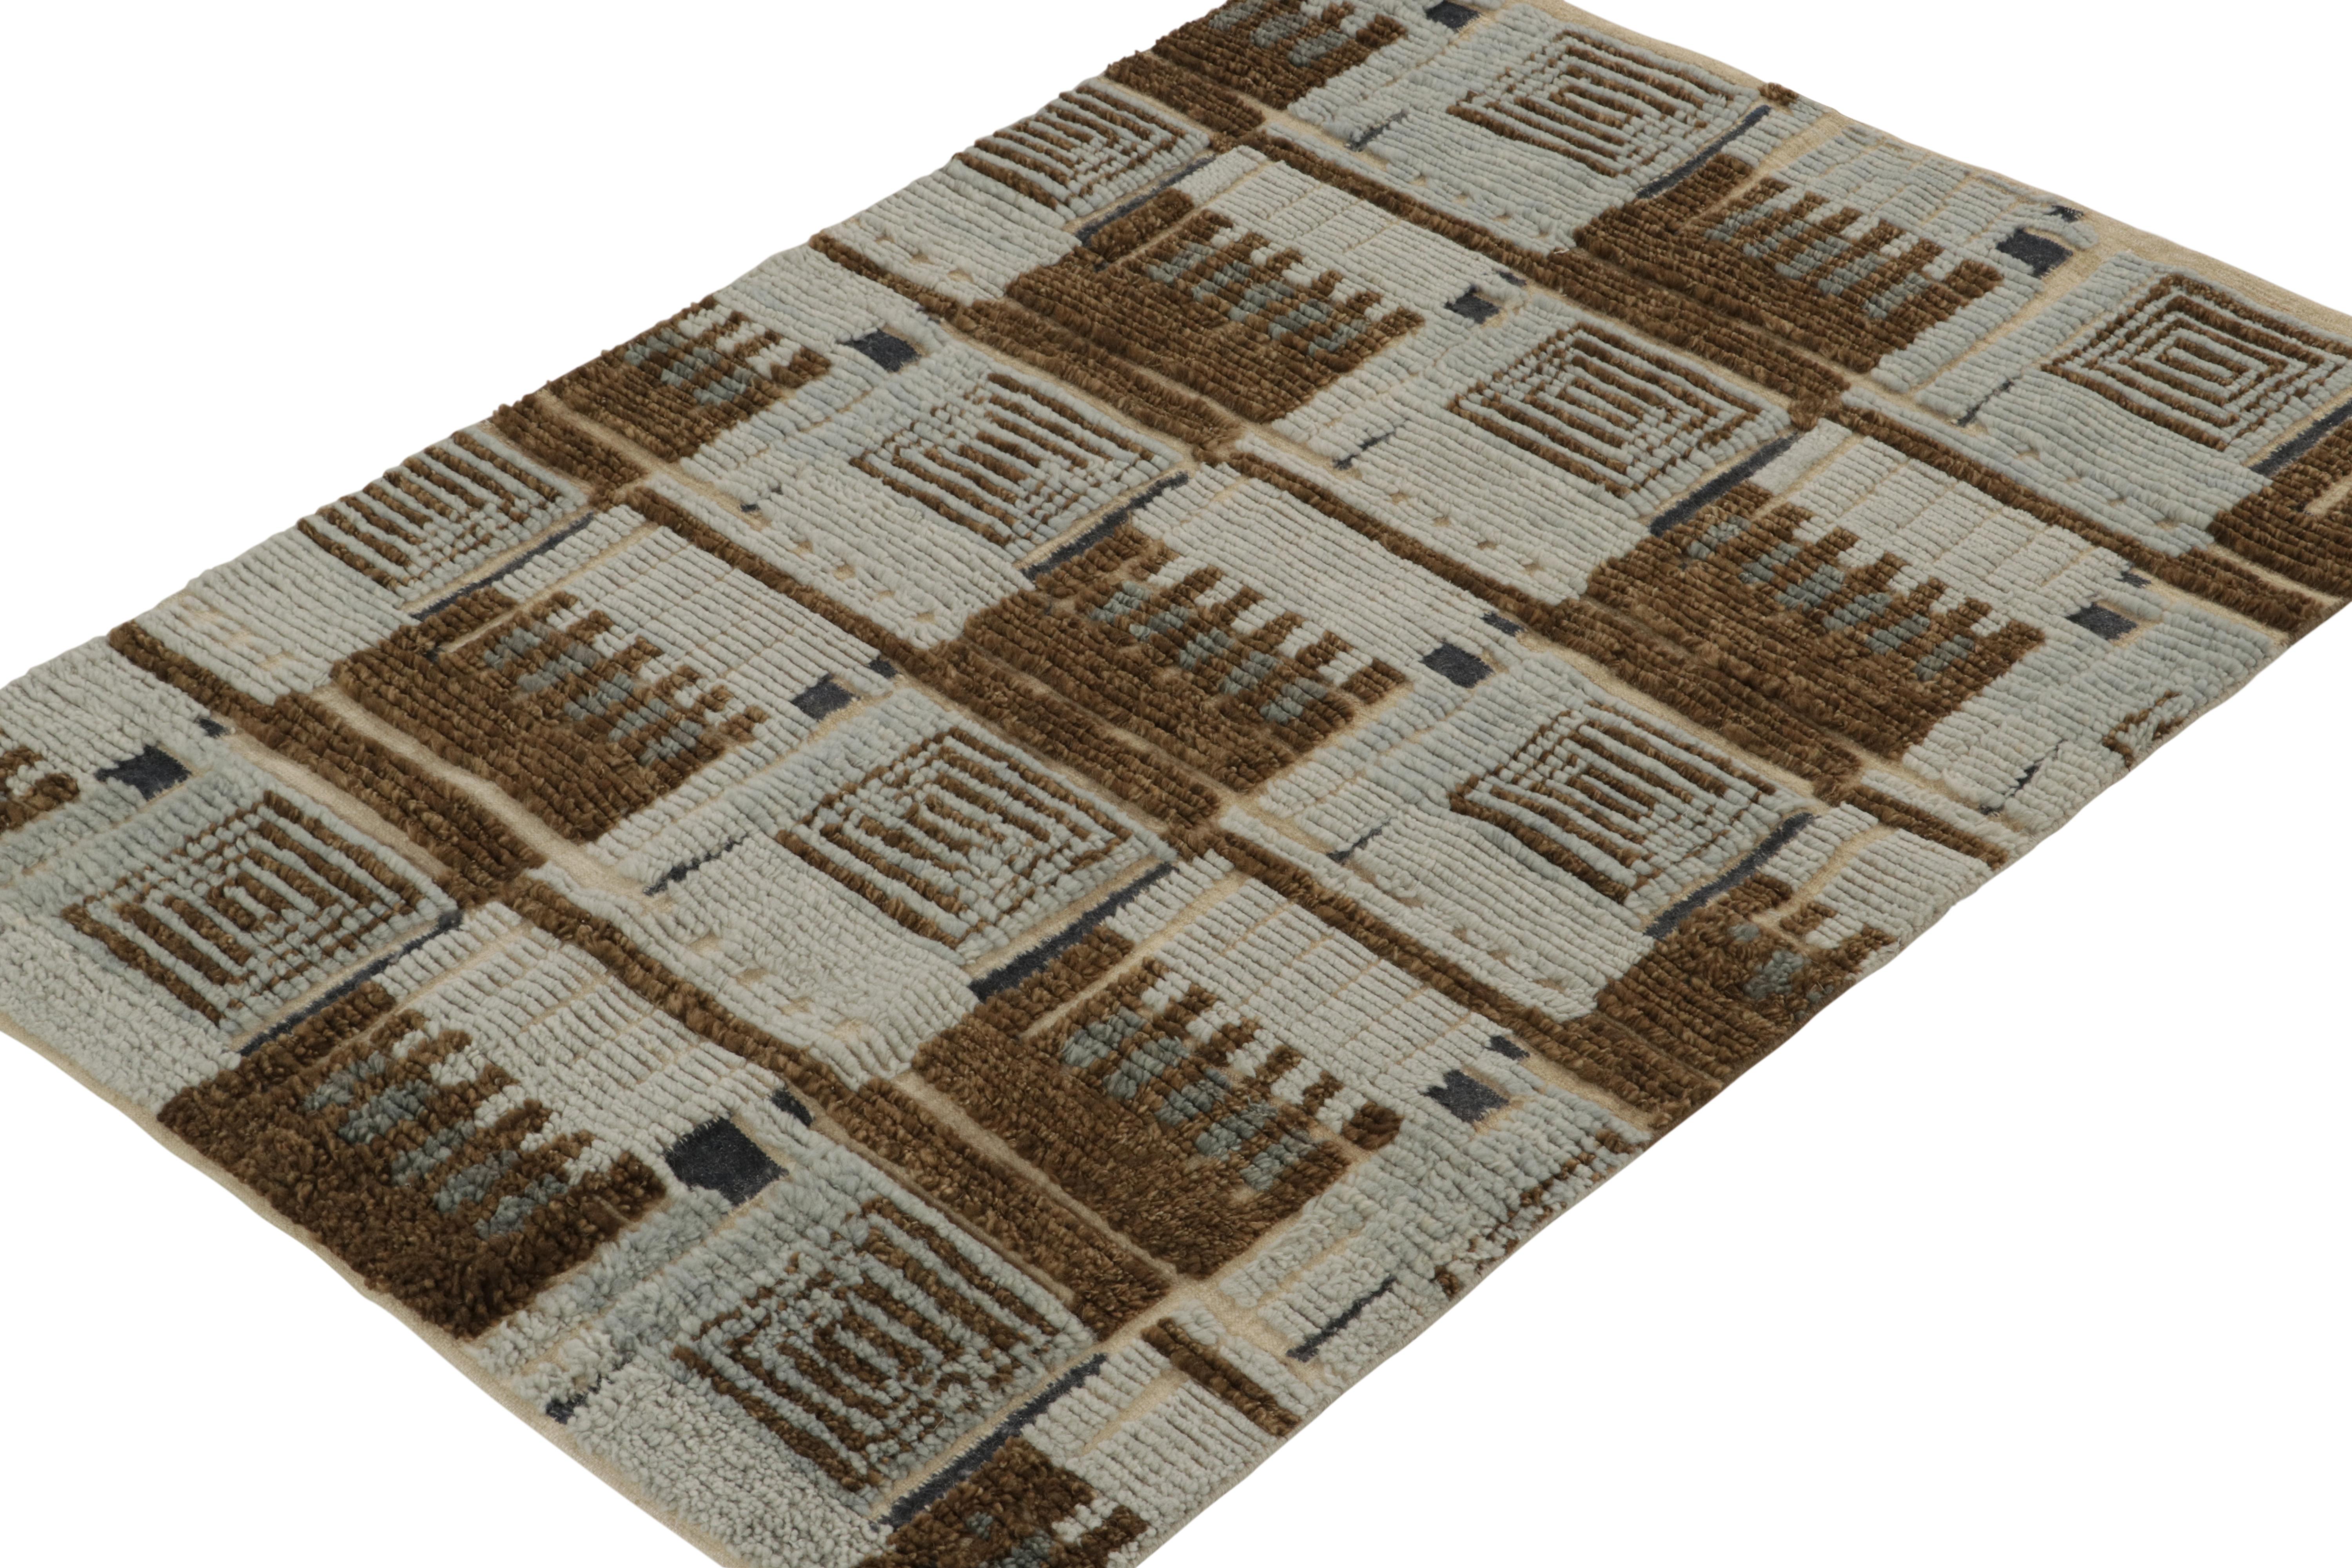 A smart 4x6 Swedish style rug from our award-winning Scandinavian collection. Hand-knotted in wool. 

On the Design: 

This rug enjoys a unique high low texture married to geometric patterns in crisp, icey blue, brown and off-white. Keen eyes will